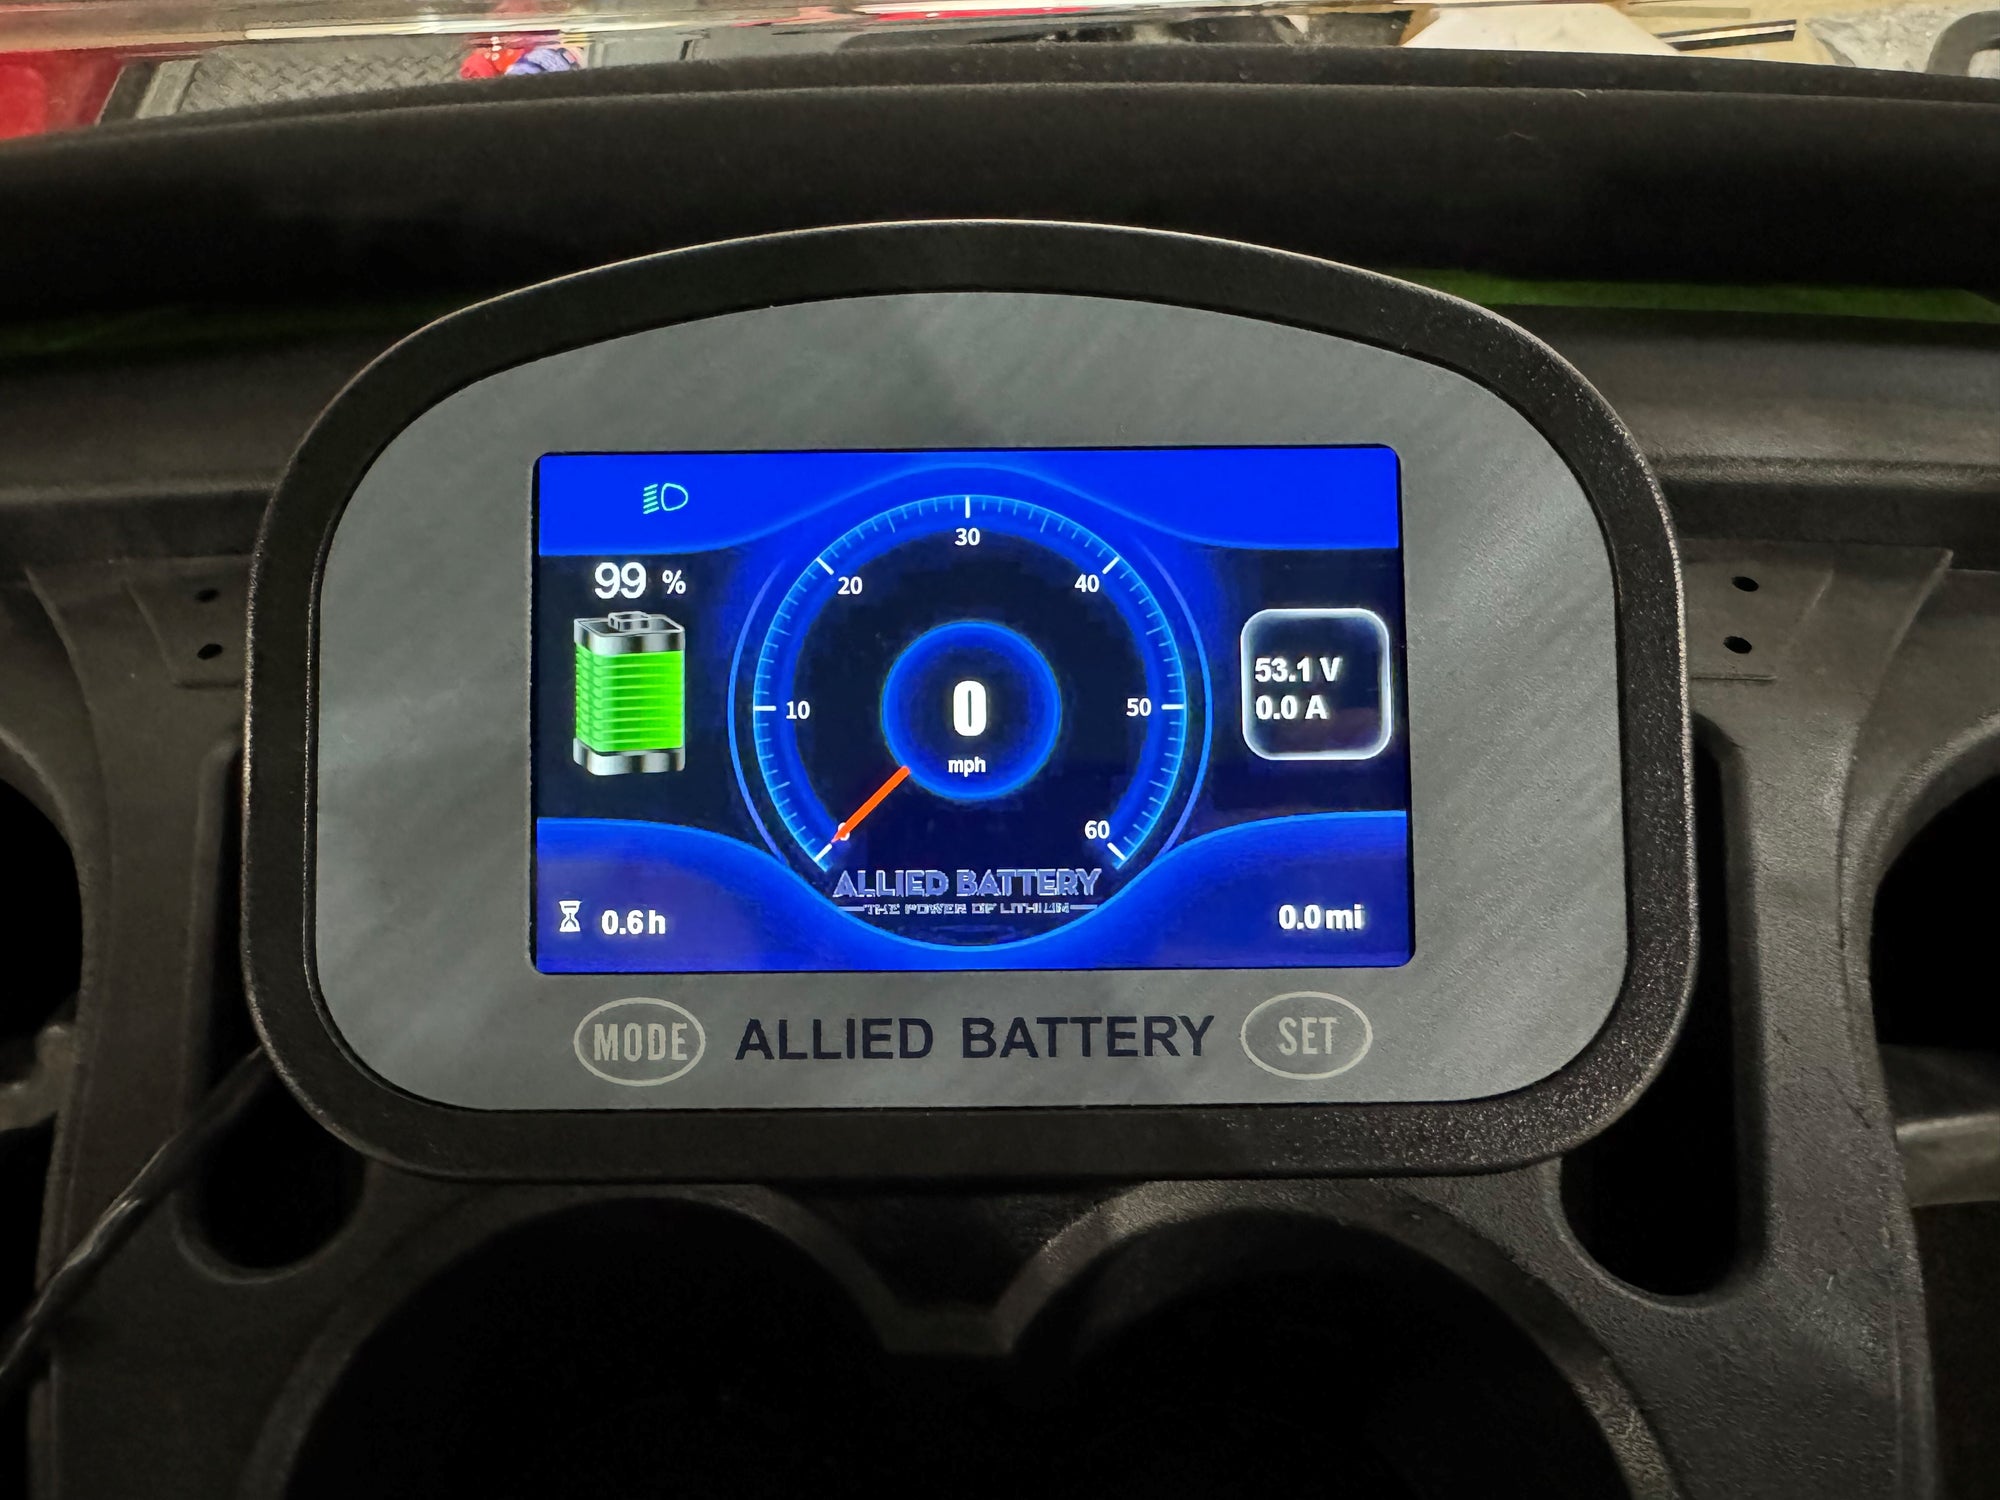 Allied Battery Presents Our NEW State of Charge Meter With Speedometer!